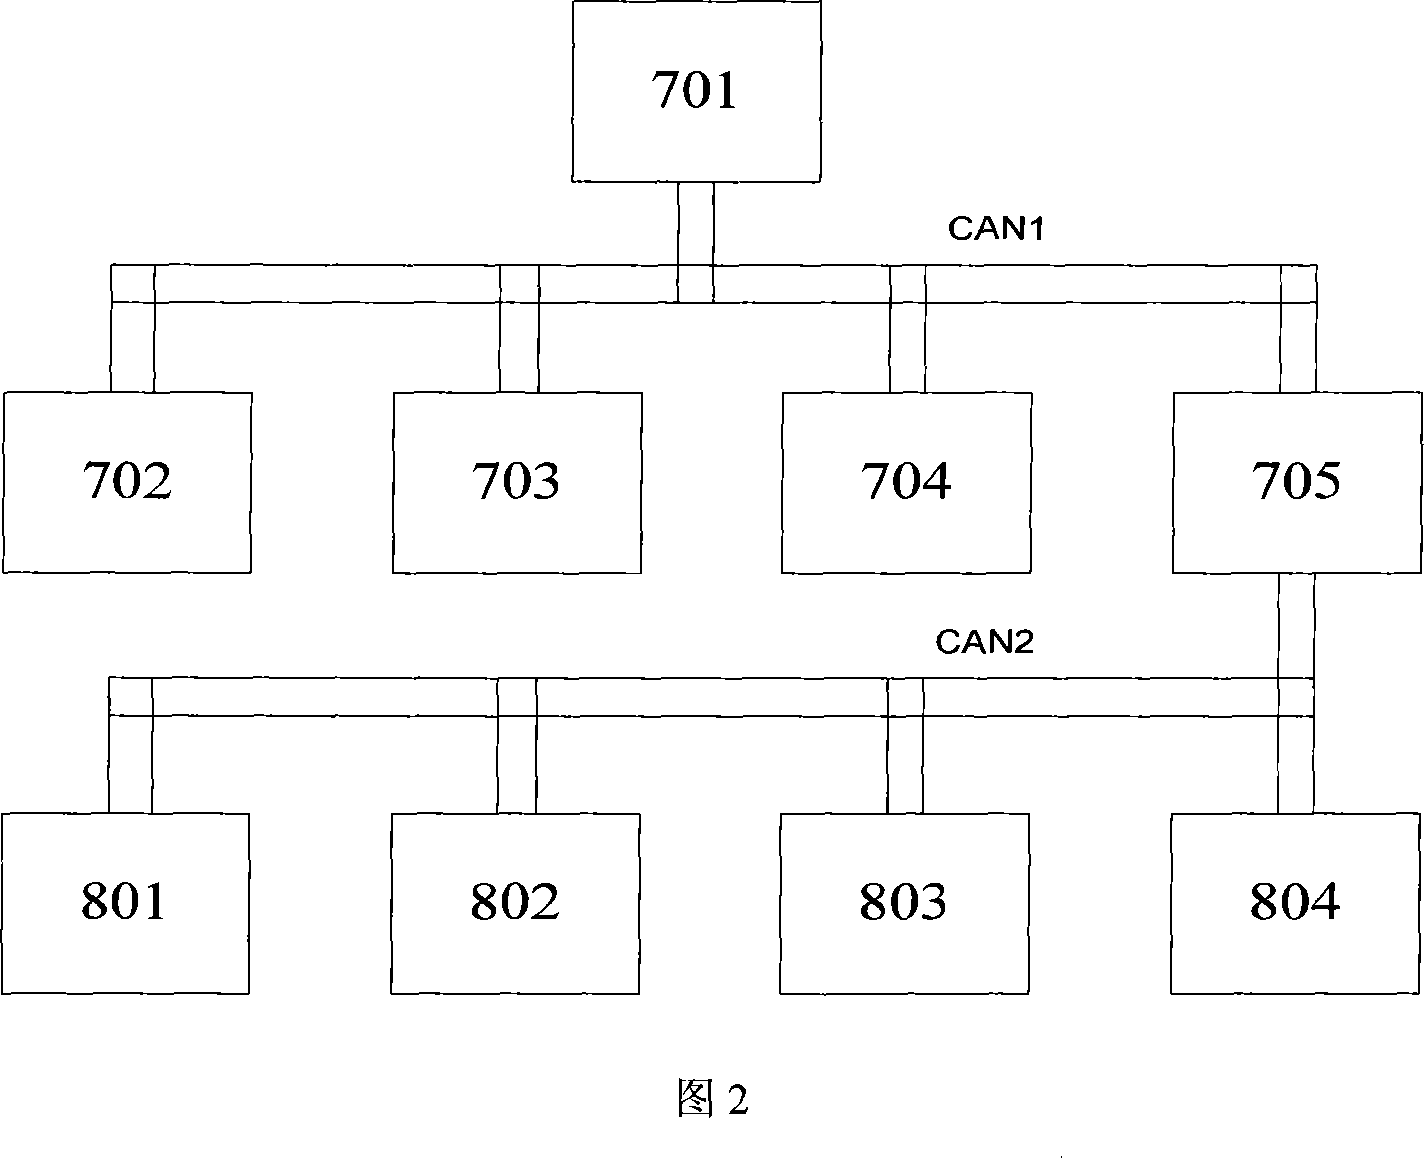 Data recording system of vehicle mounted fuel cell engine